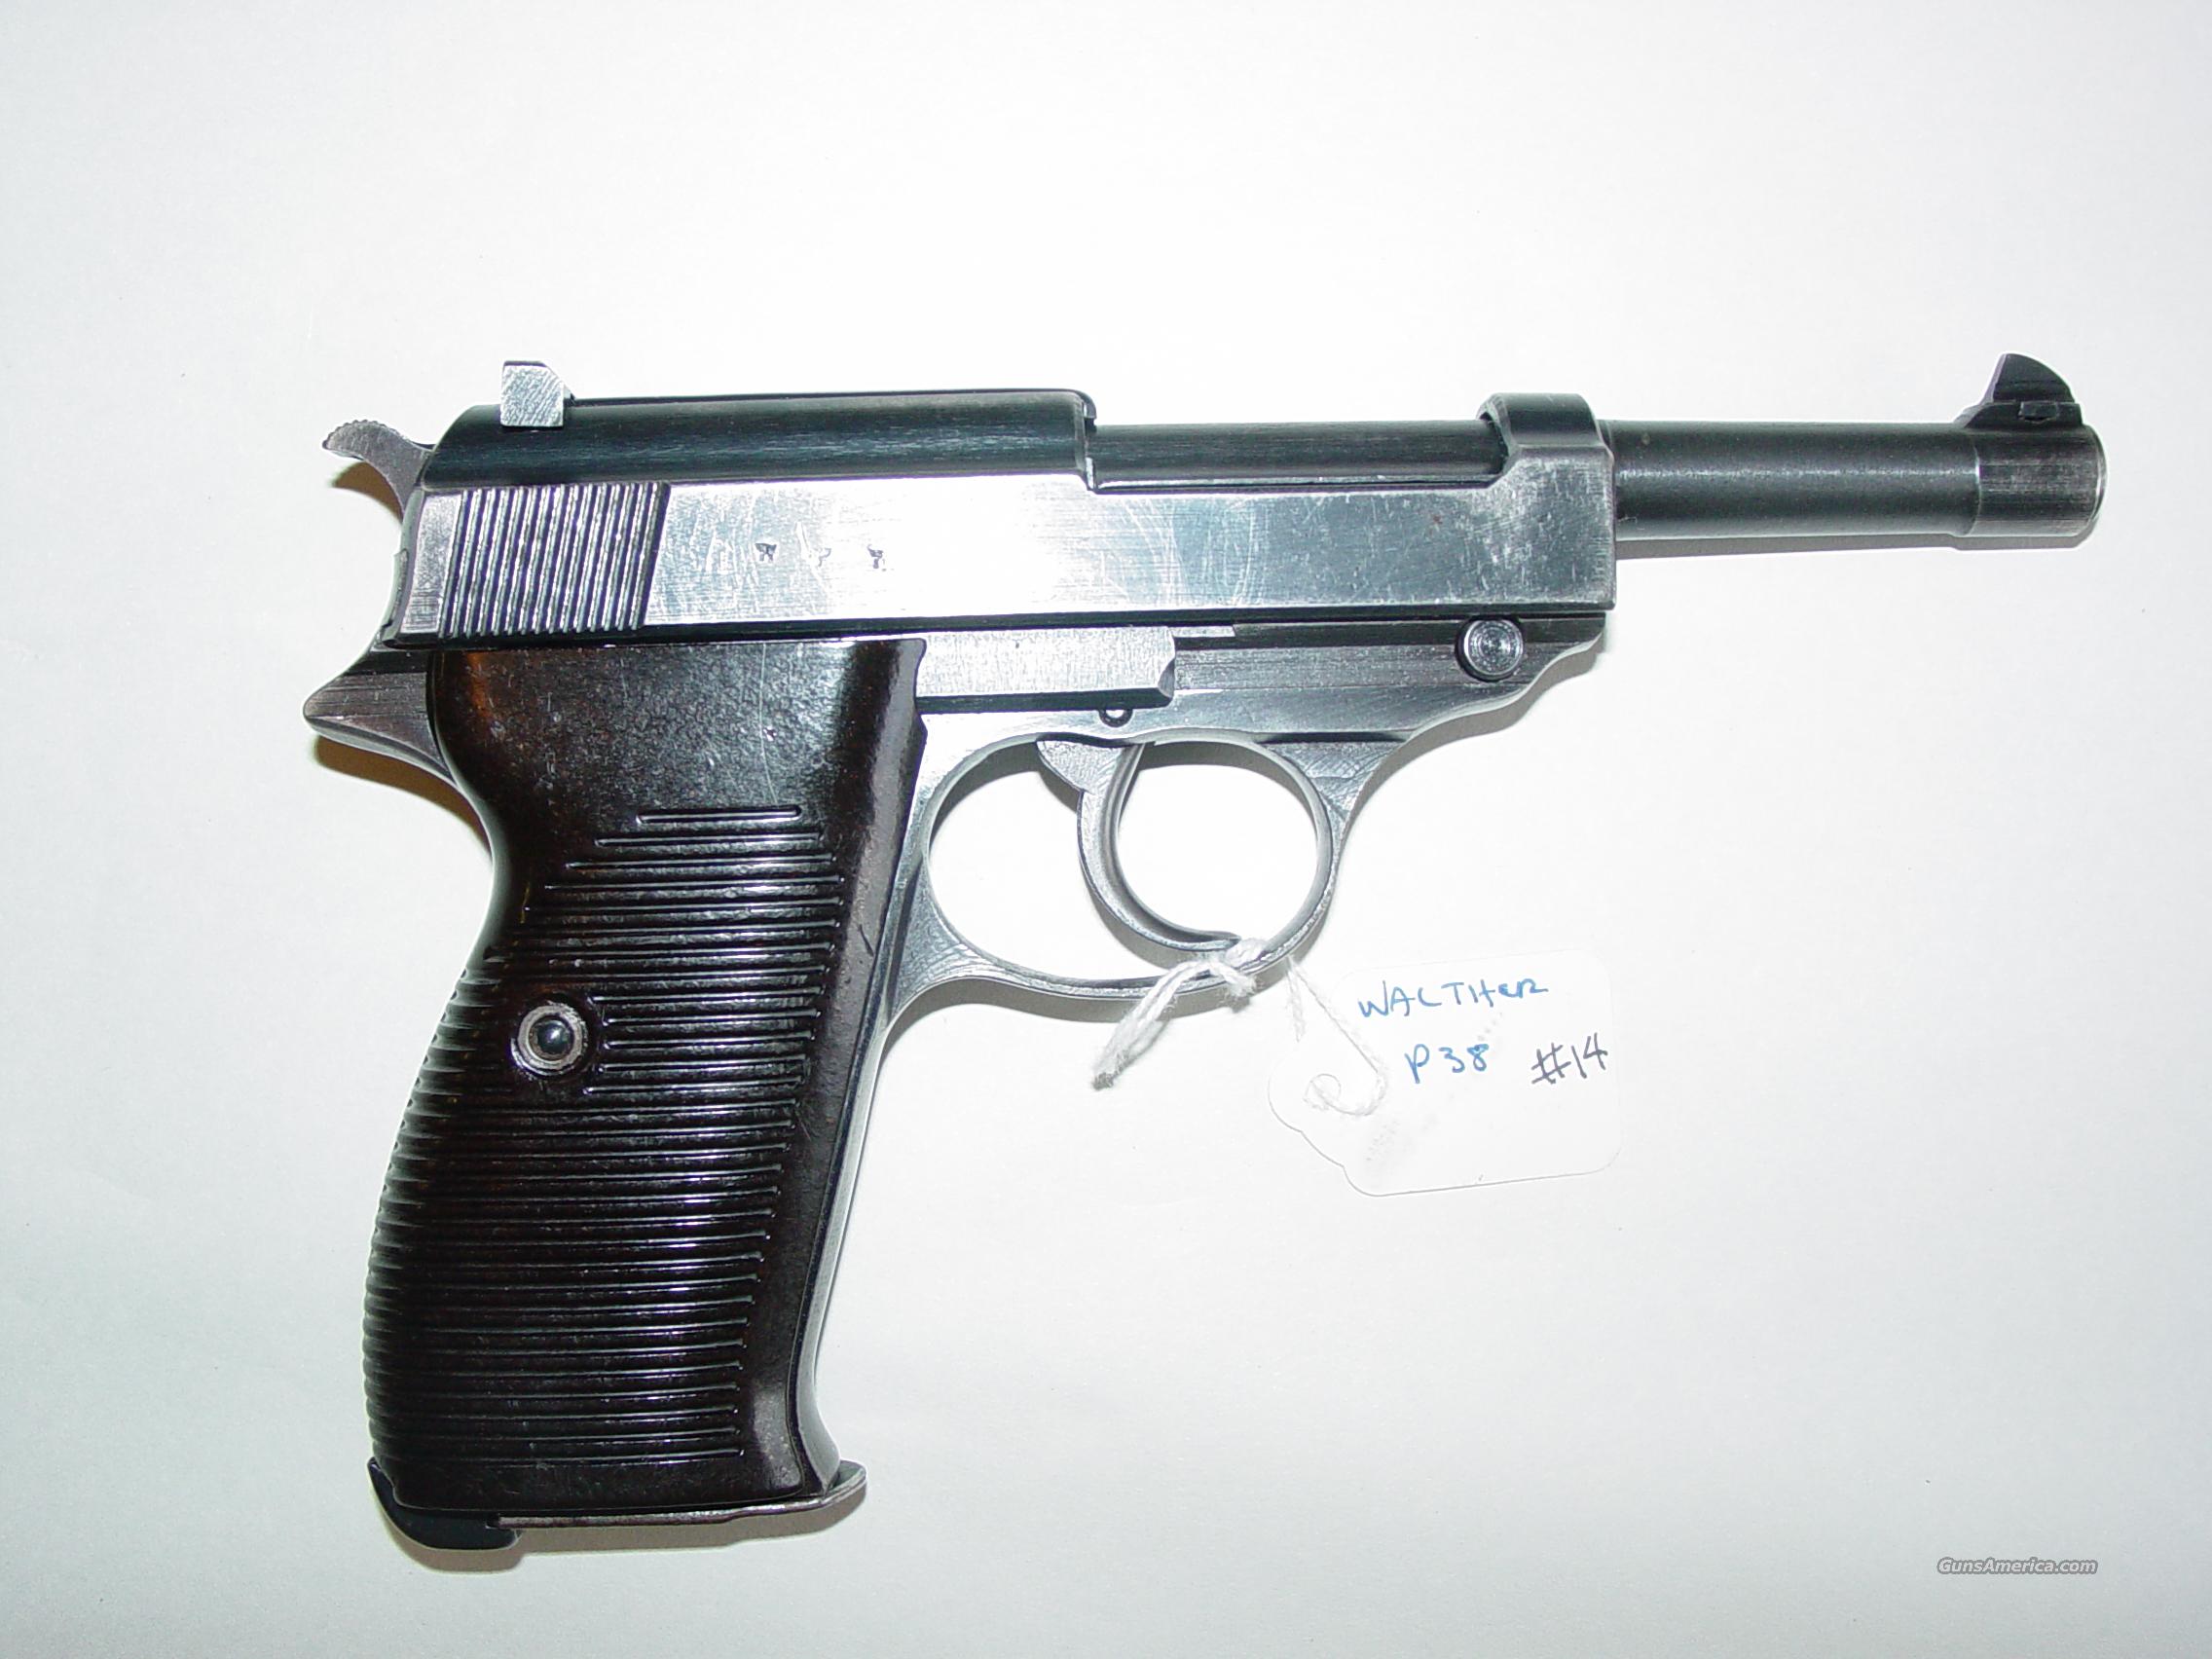 Walther p38 serial numbers